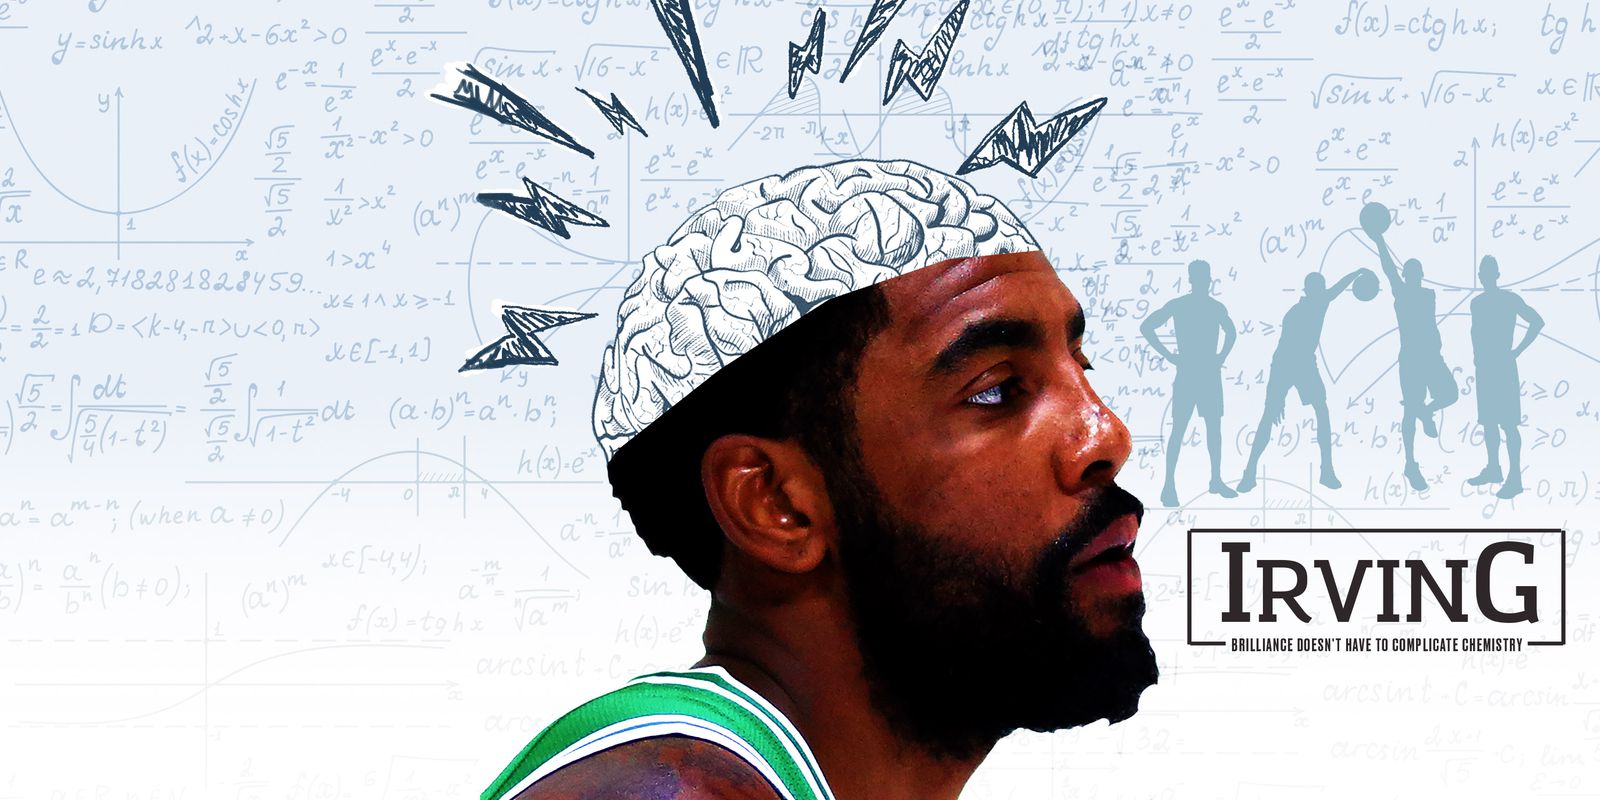 Kyrie Irving’s intellectual curiosity makes him the perfect leader for the Celtics